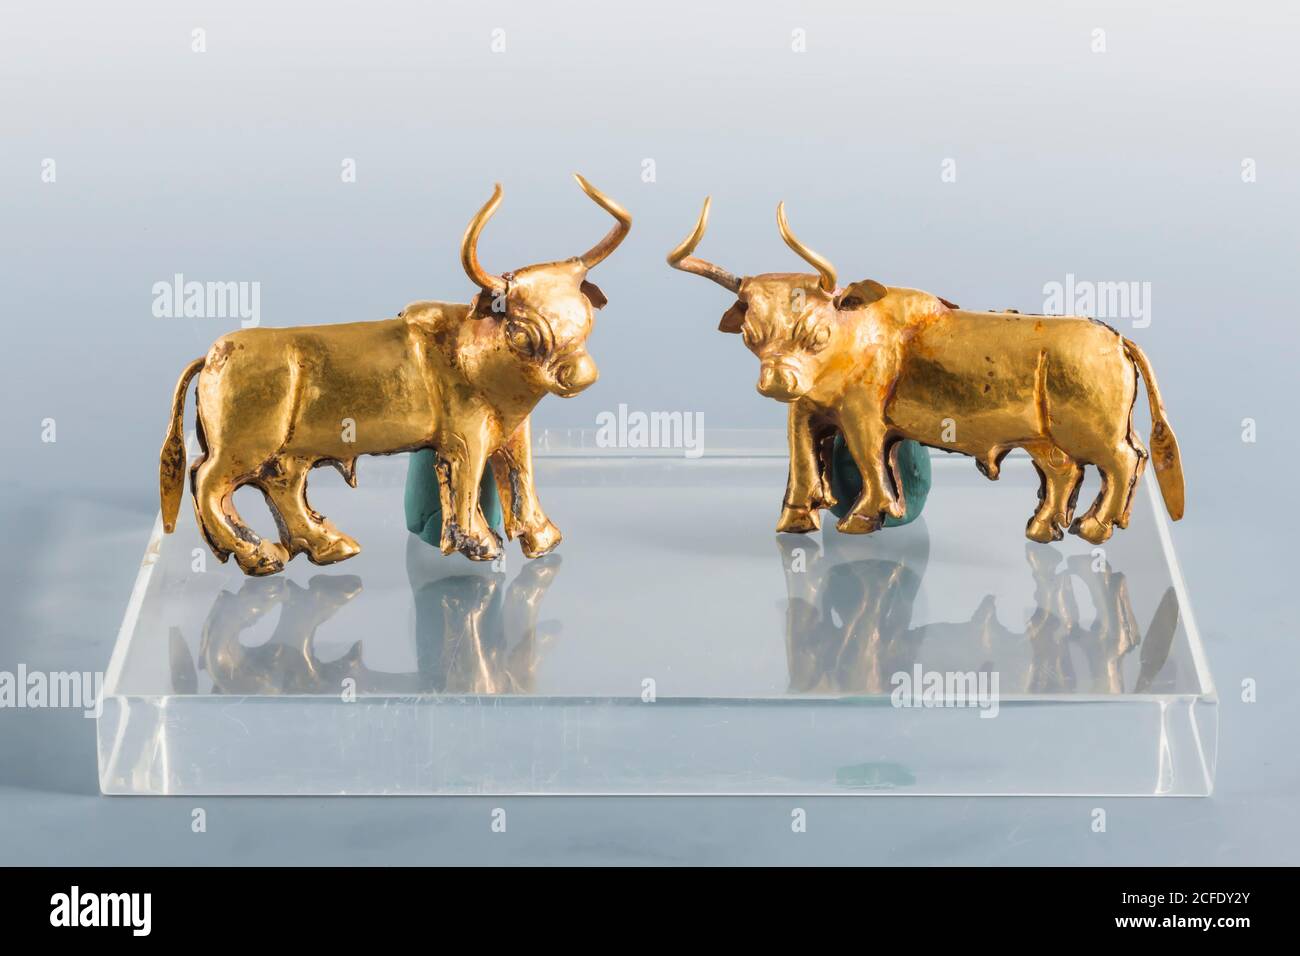 Gold Bull statues, from Quetta, Indus valley civilization (valuables vault), National Museum of Pakistan, Karachi, Sindh, Pakistan, South Asia, Asia Stock Photo